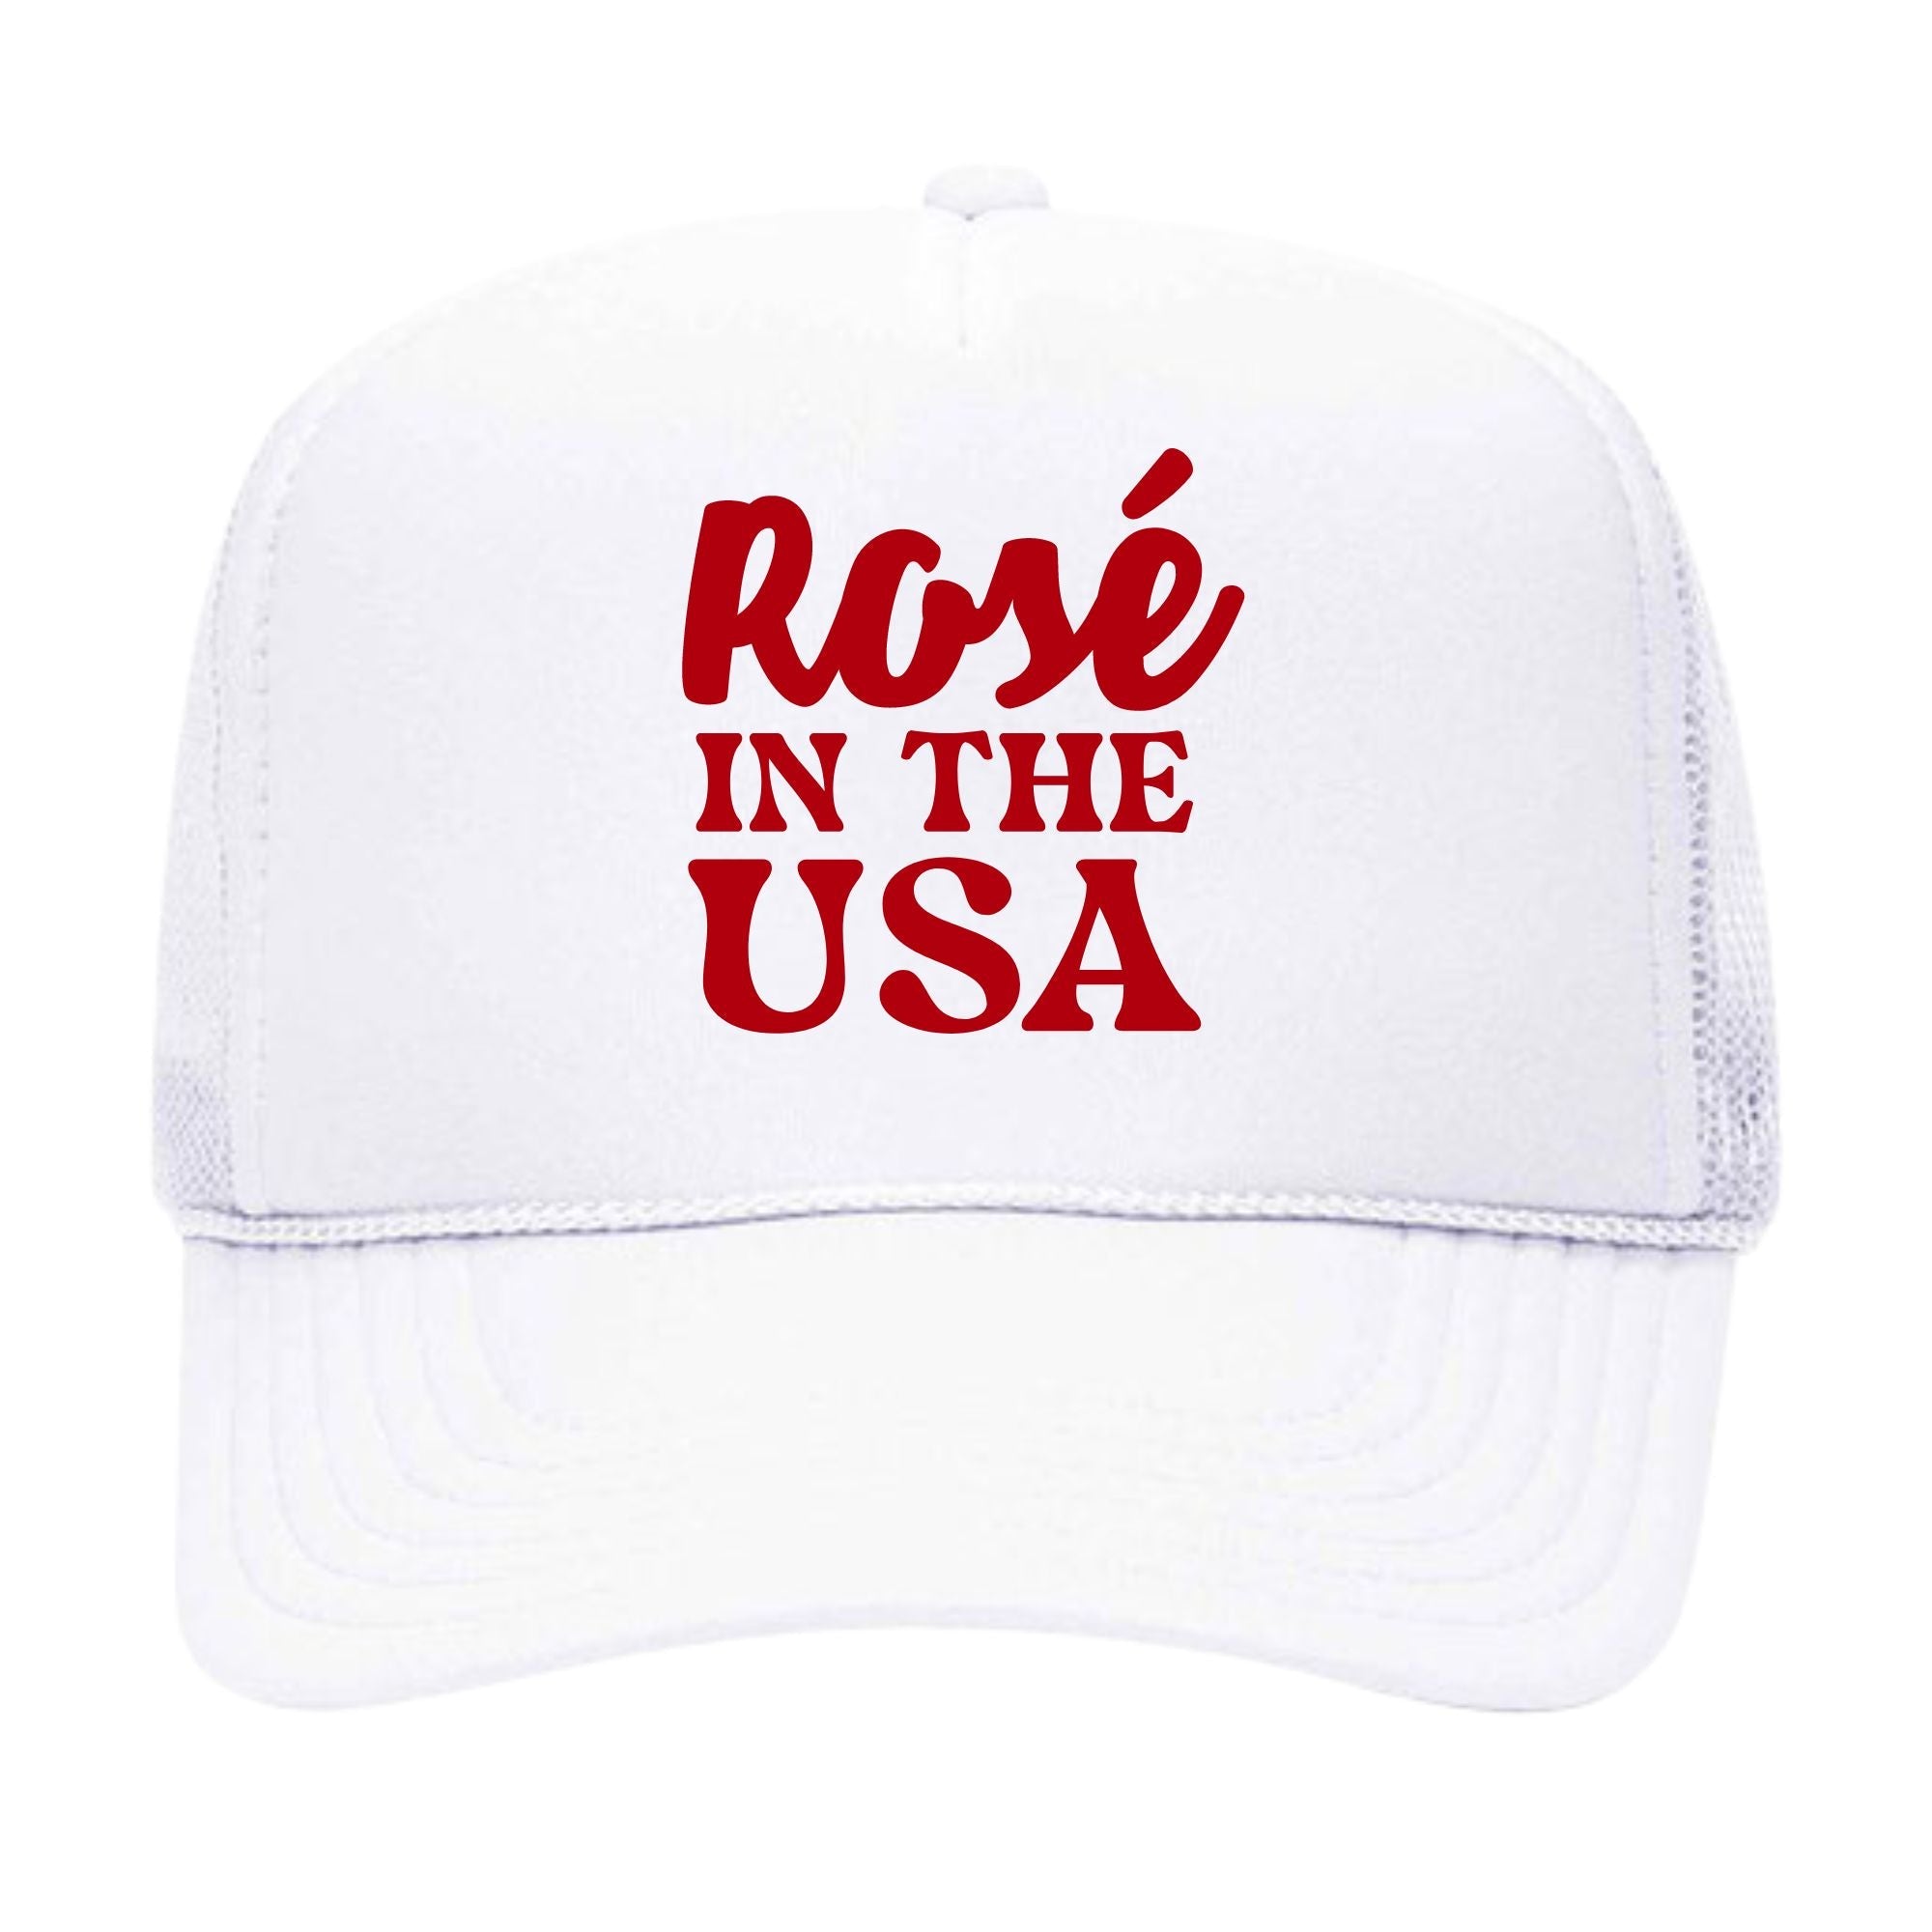 Rosé In the USA Trucker Hat (White) - Sprinkled With Pink #bachelorette #custom #gifts